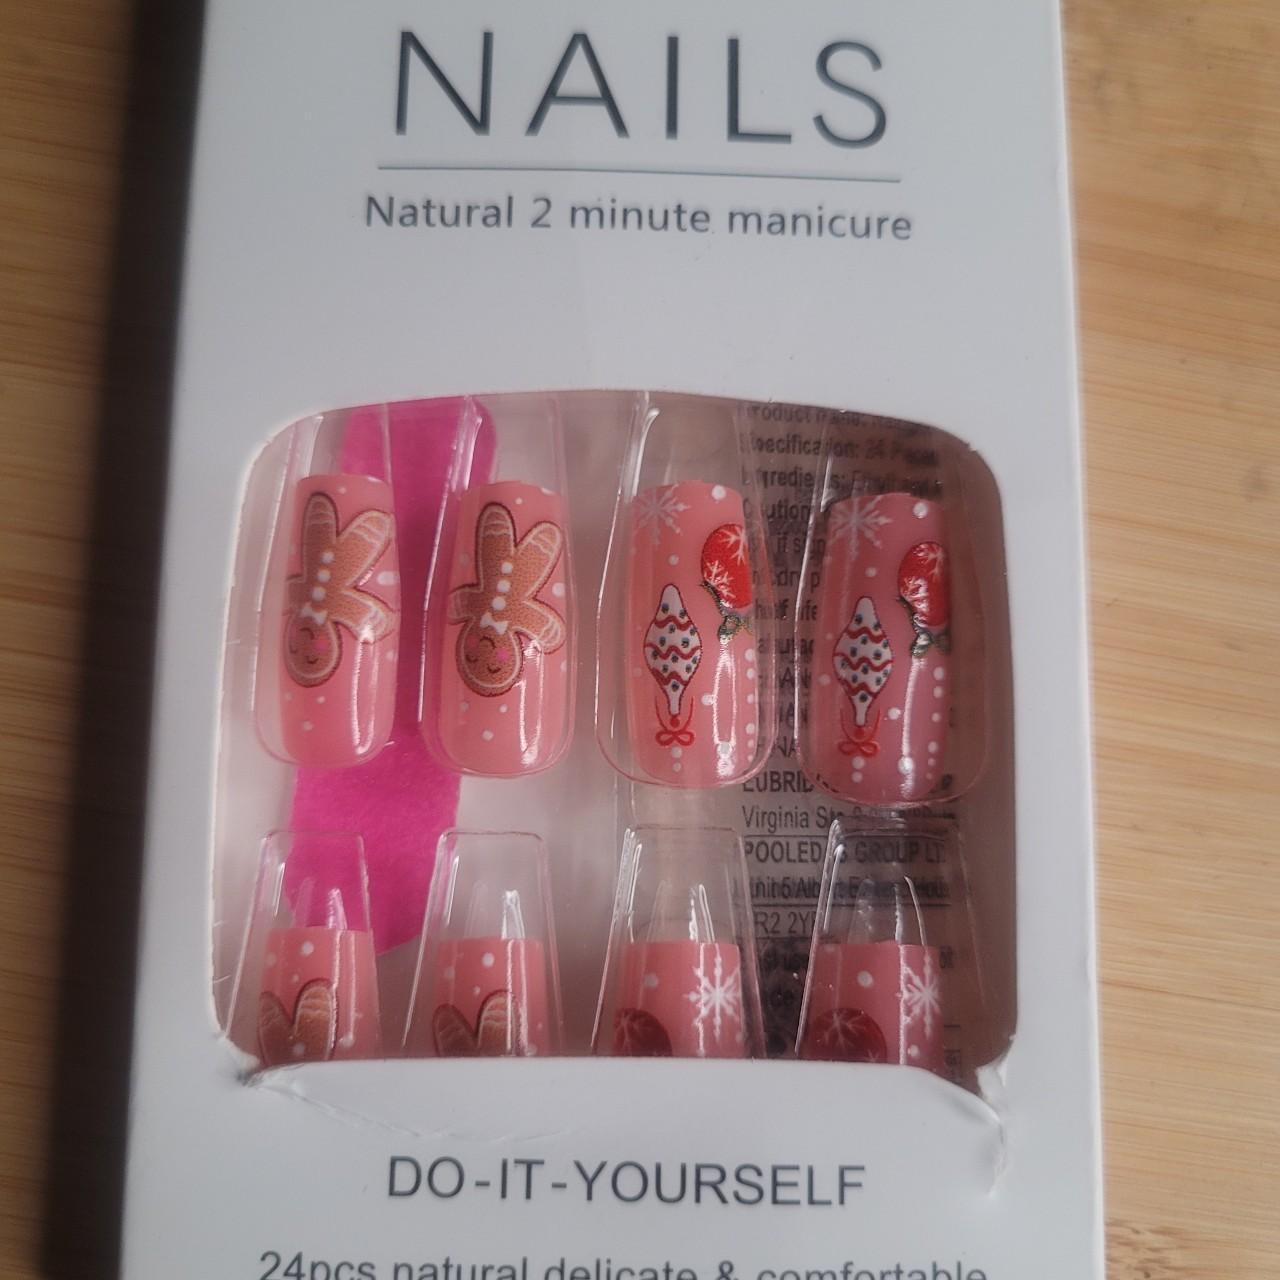 NEW Nails Do It Yourself Nails- 24 pcs - Pink w Butterfly Tip W18 | eBay